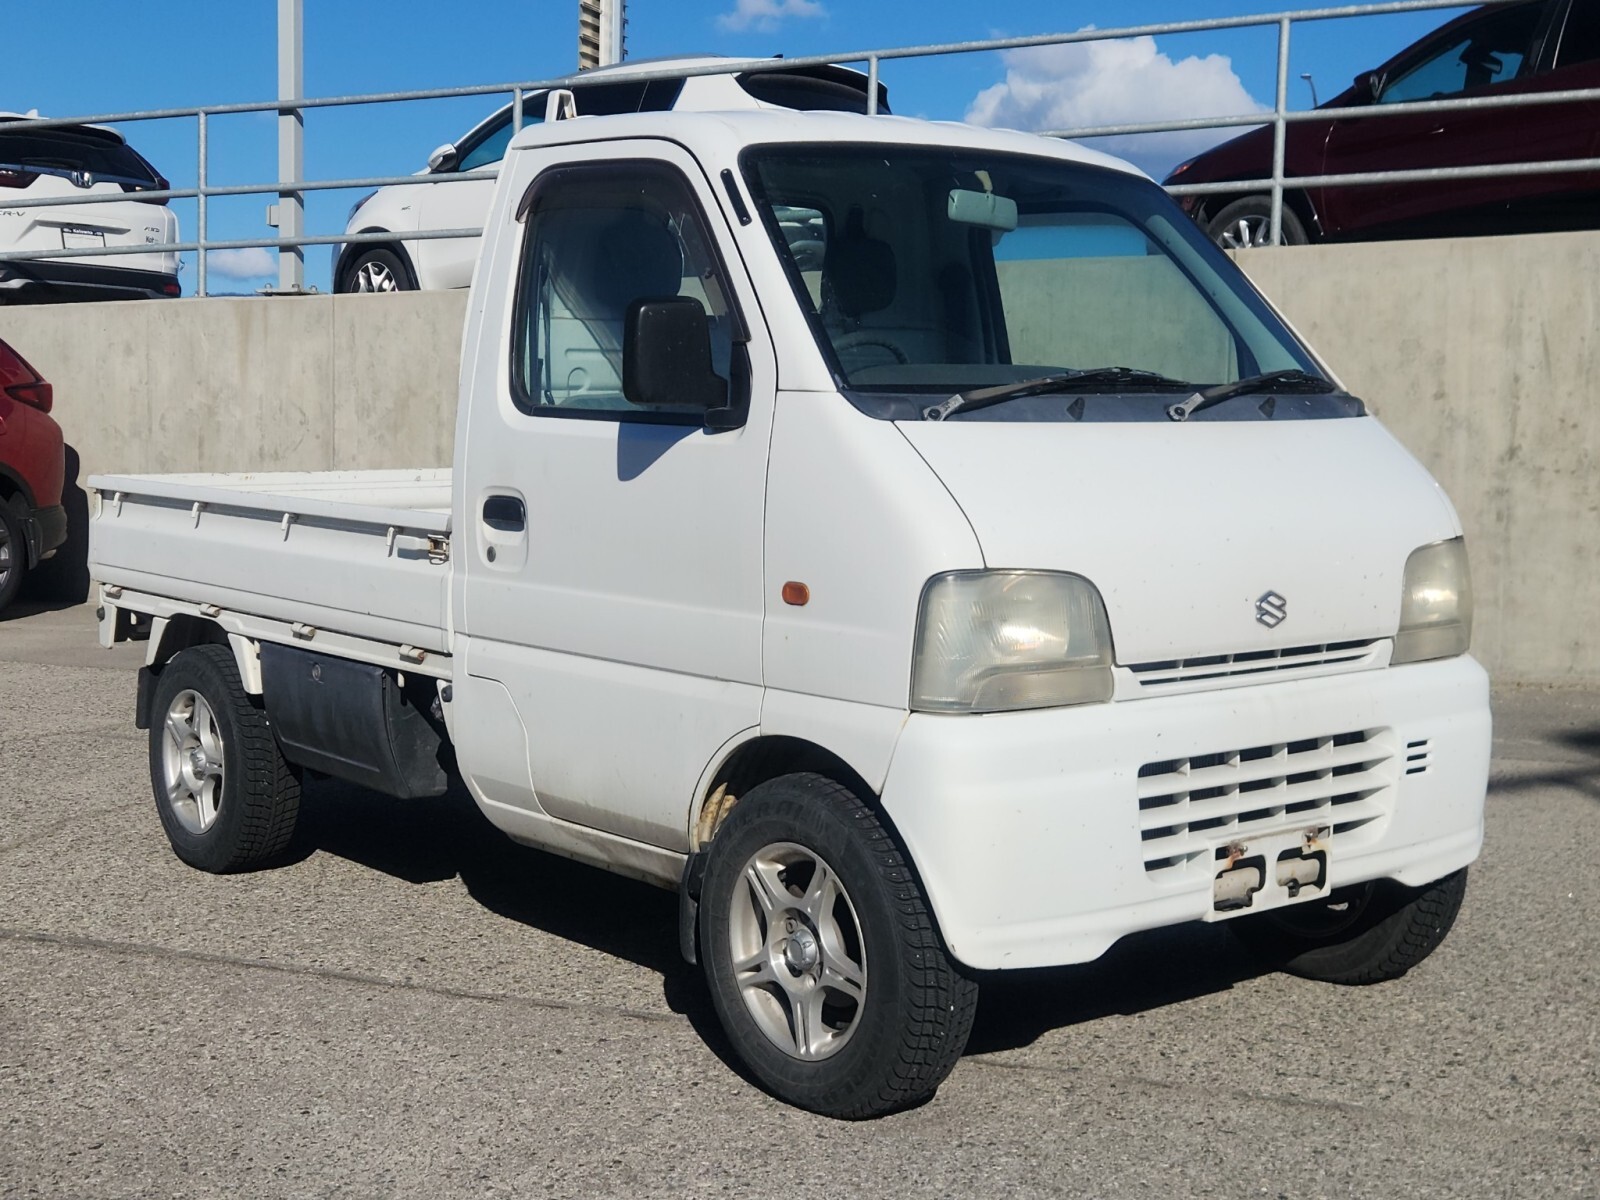 1999 Suzuki Carry Flat Bed ! 4WD! RIGHT HAND DRIVE! A/C! RELIABLE! D